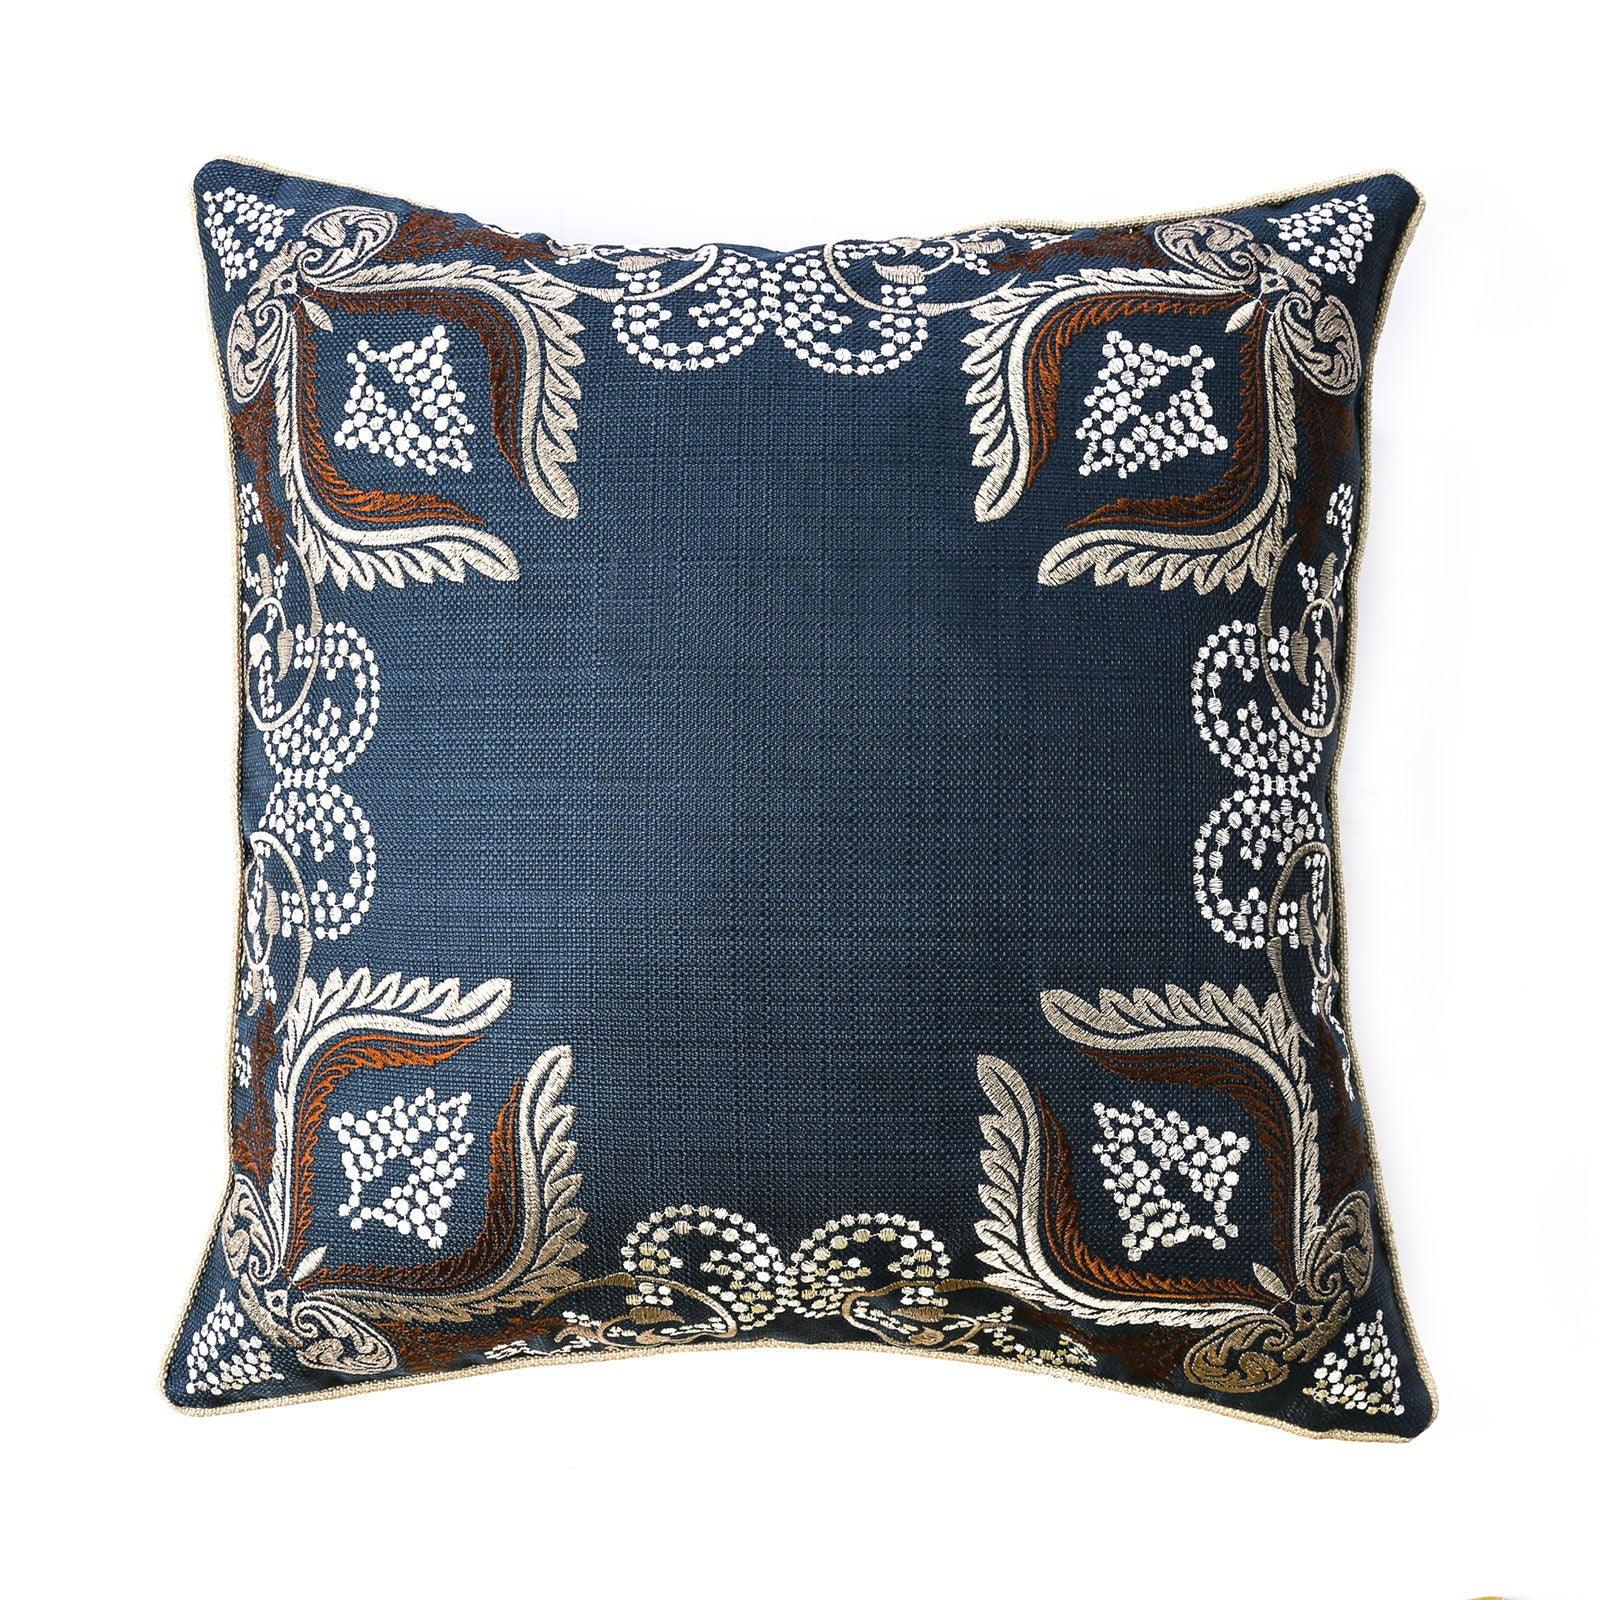 Furniture of America - Dina - Pillow (Set of 2) - Navy - 5th Avenue Furniture